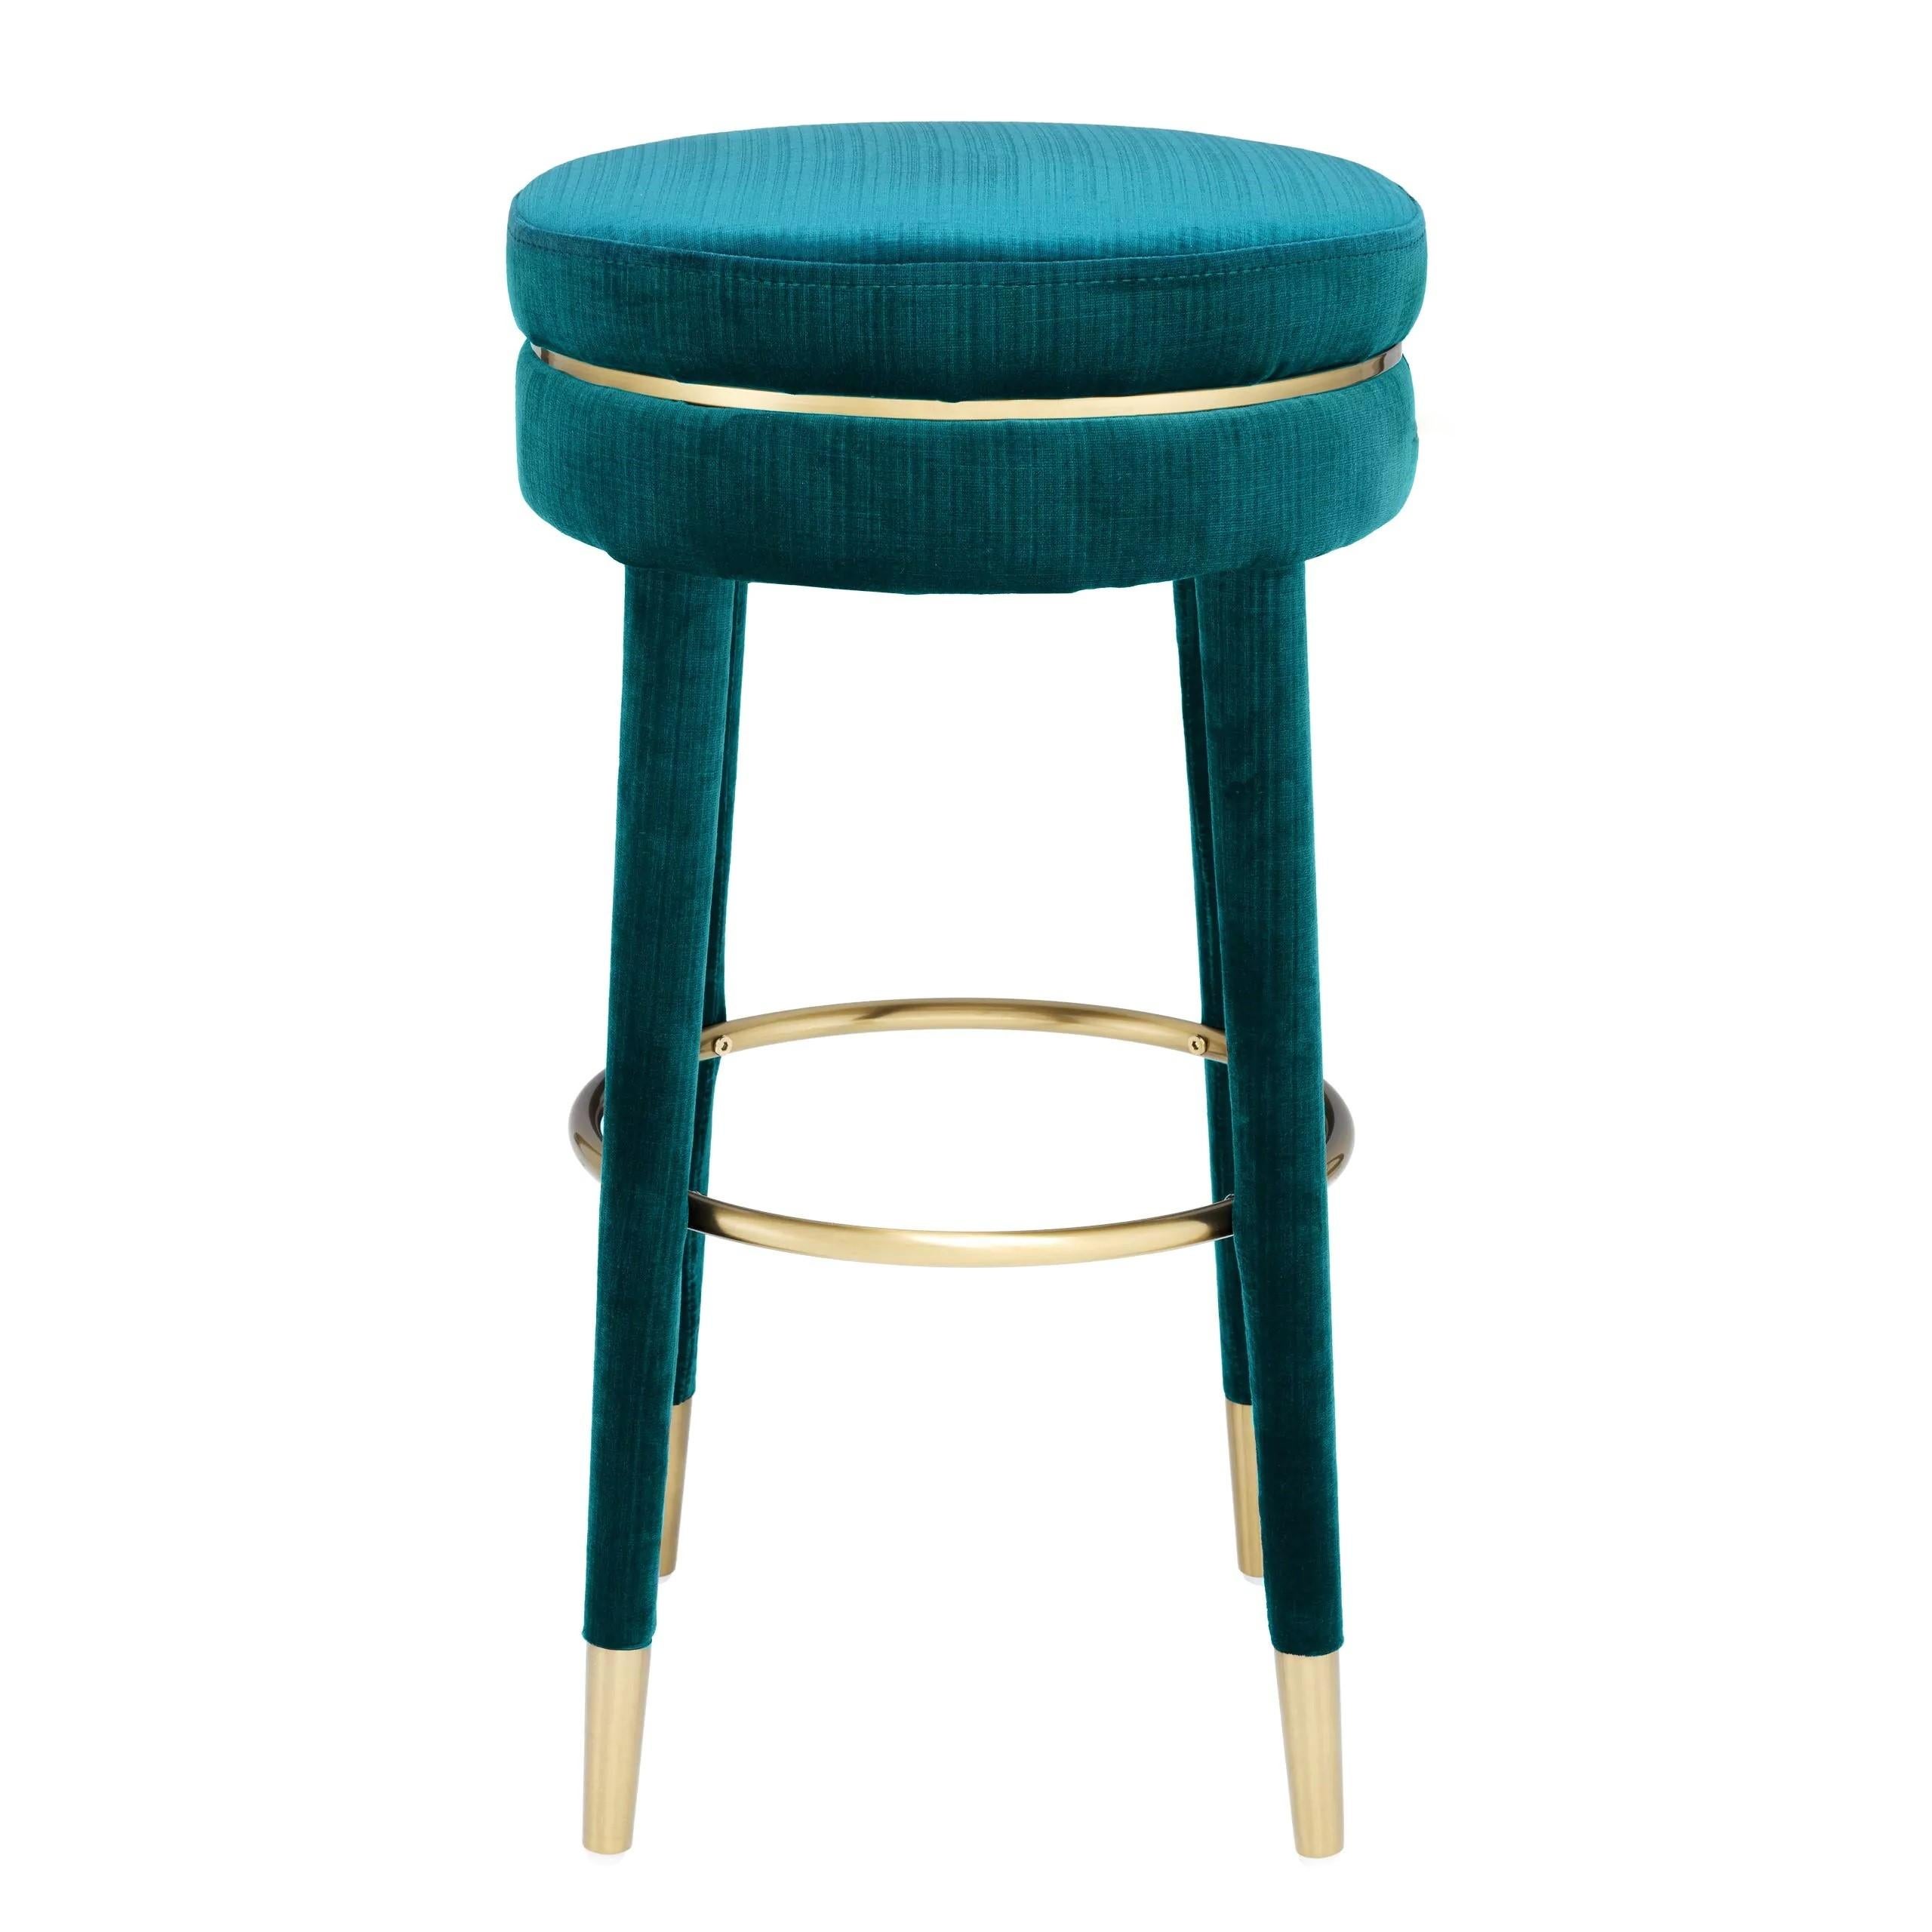 Contemporary French Art Deco Design Style All In Blue Velvet And Brass Finishes Counter Stool